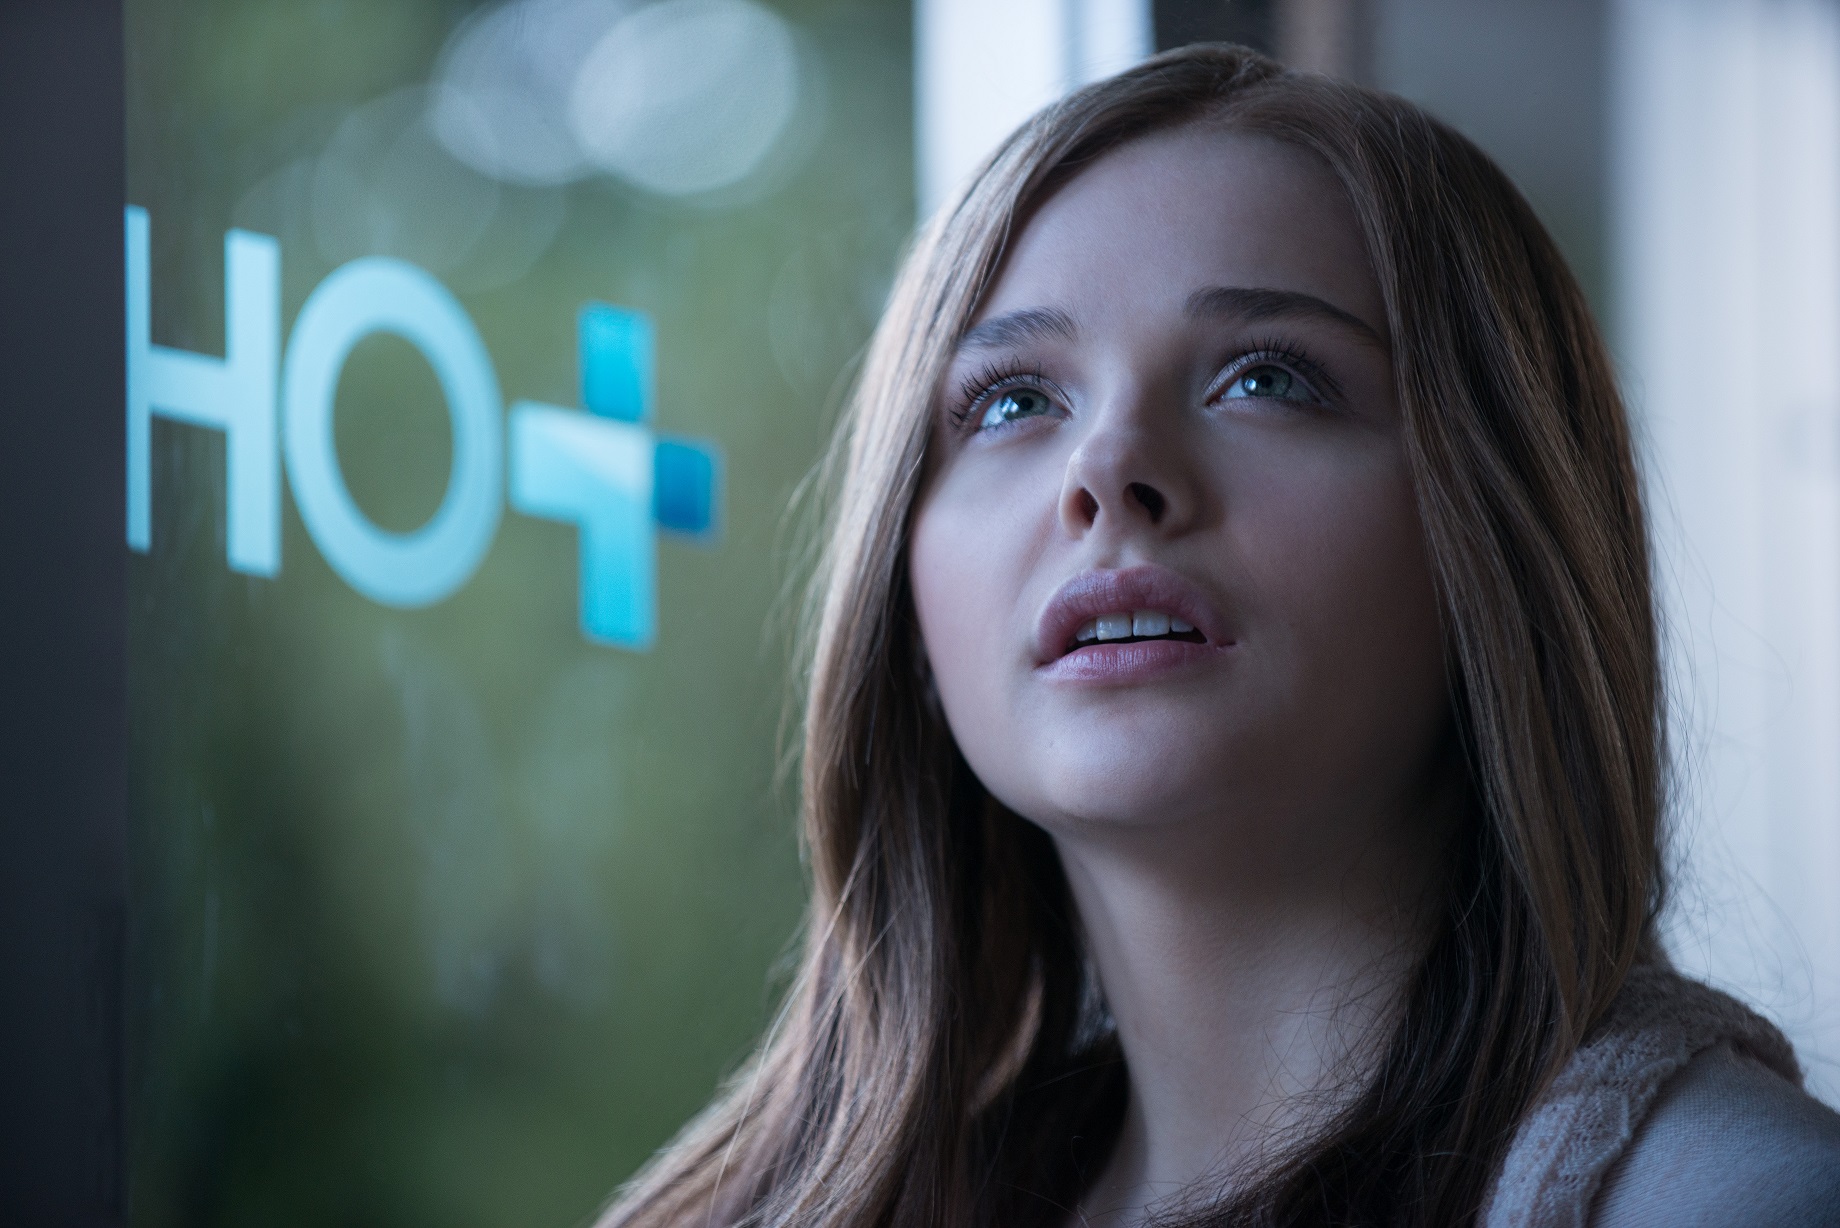 IF I STAY 29